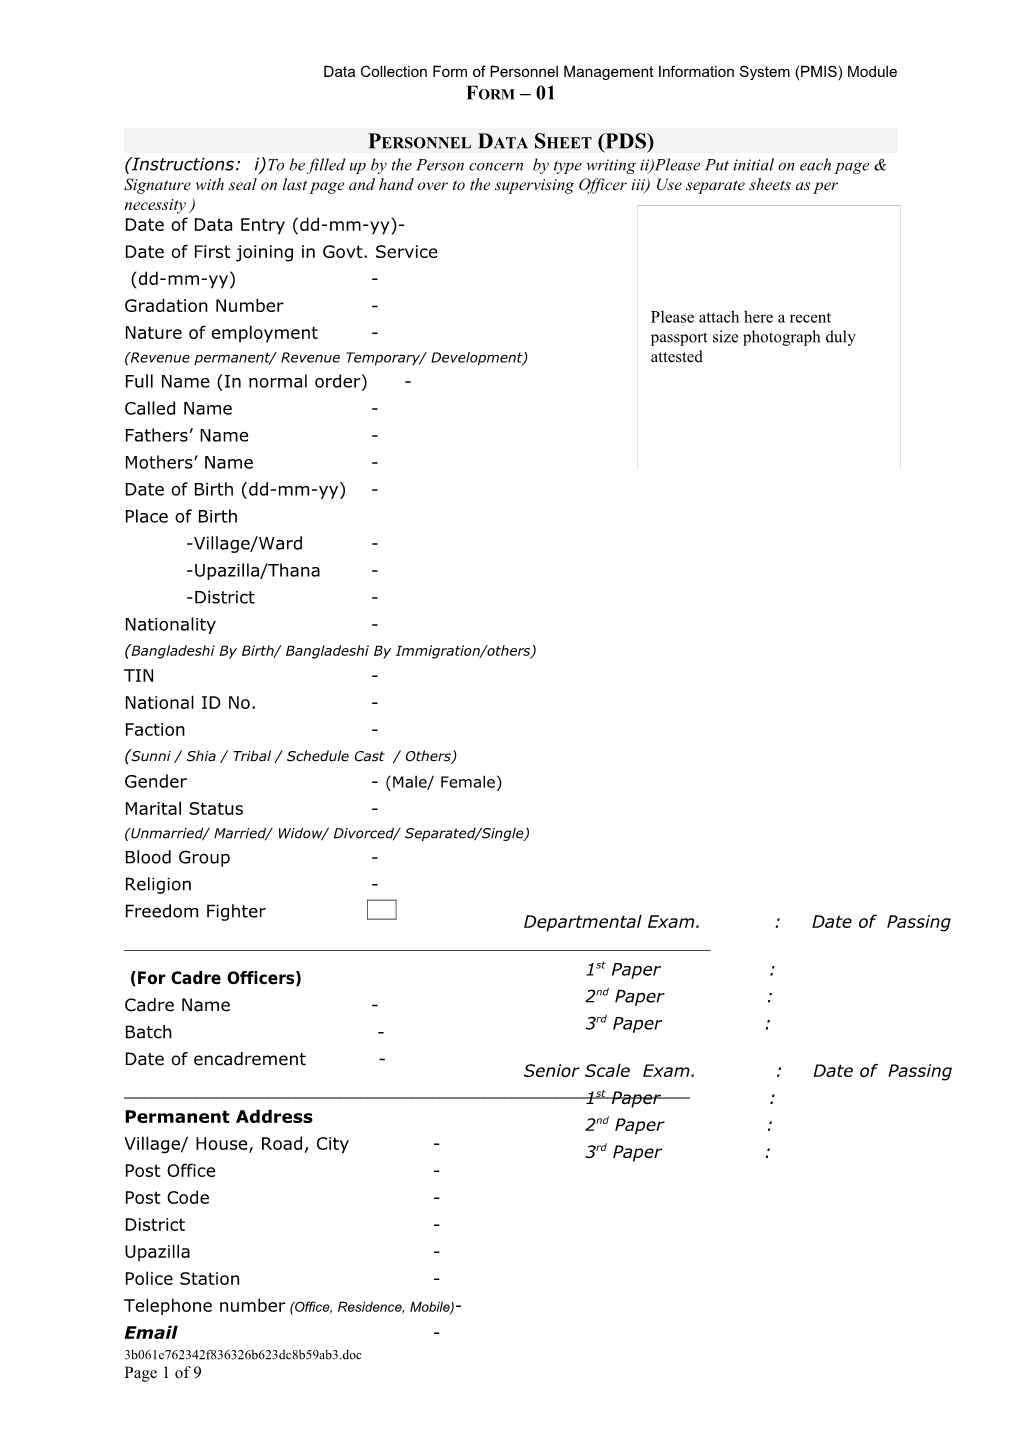 Data Collection Form of Personnel Management Information System (PMIS) Module